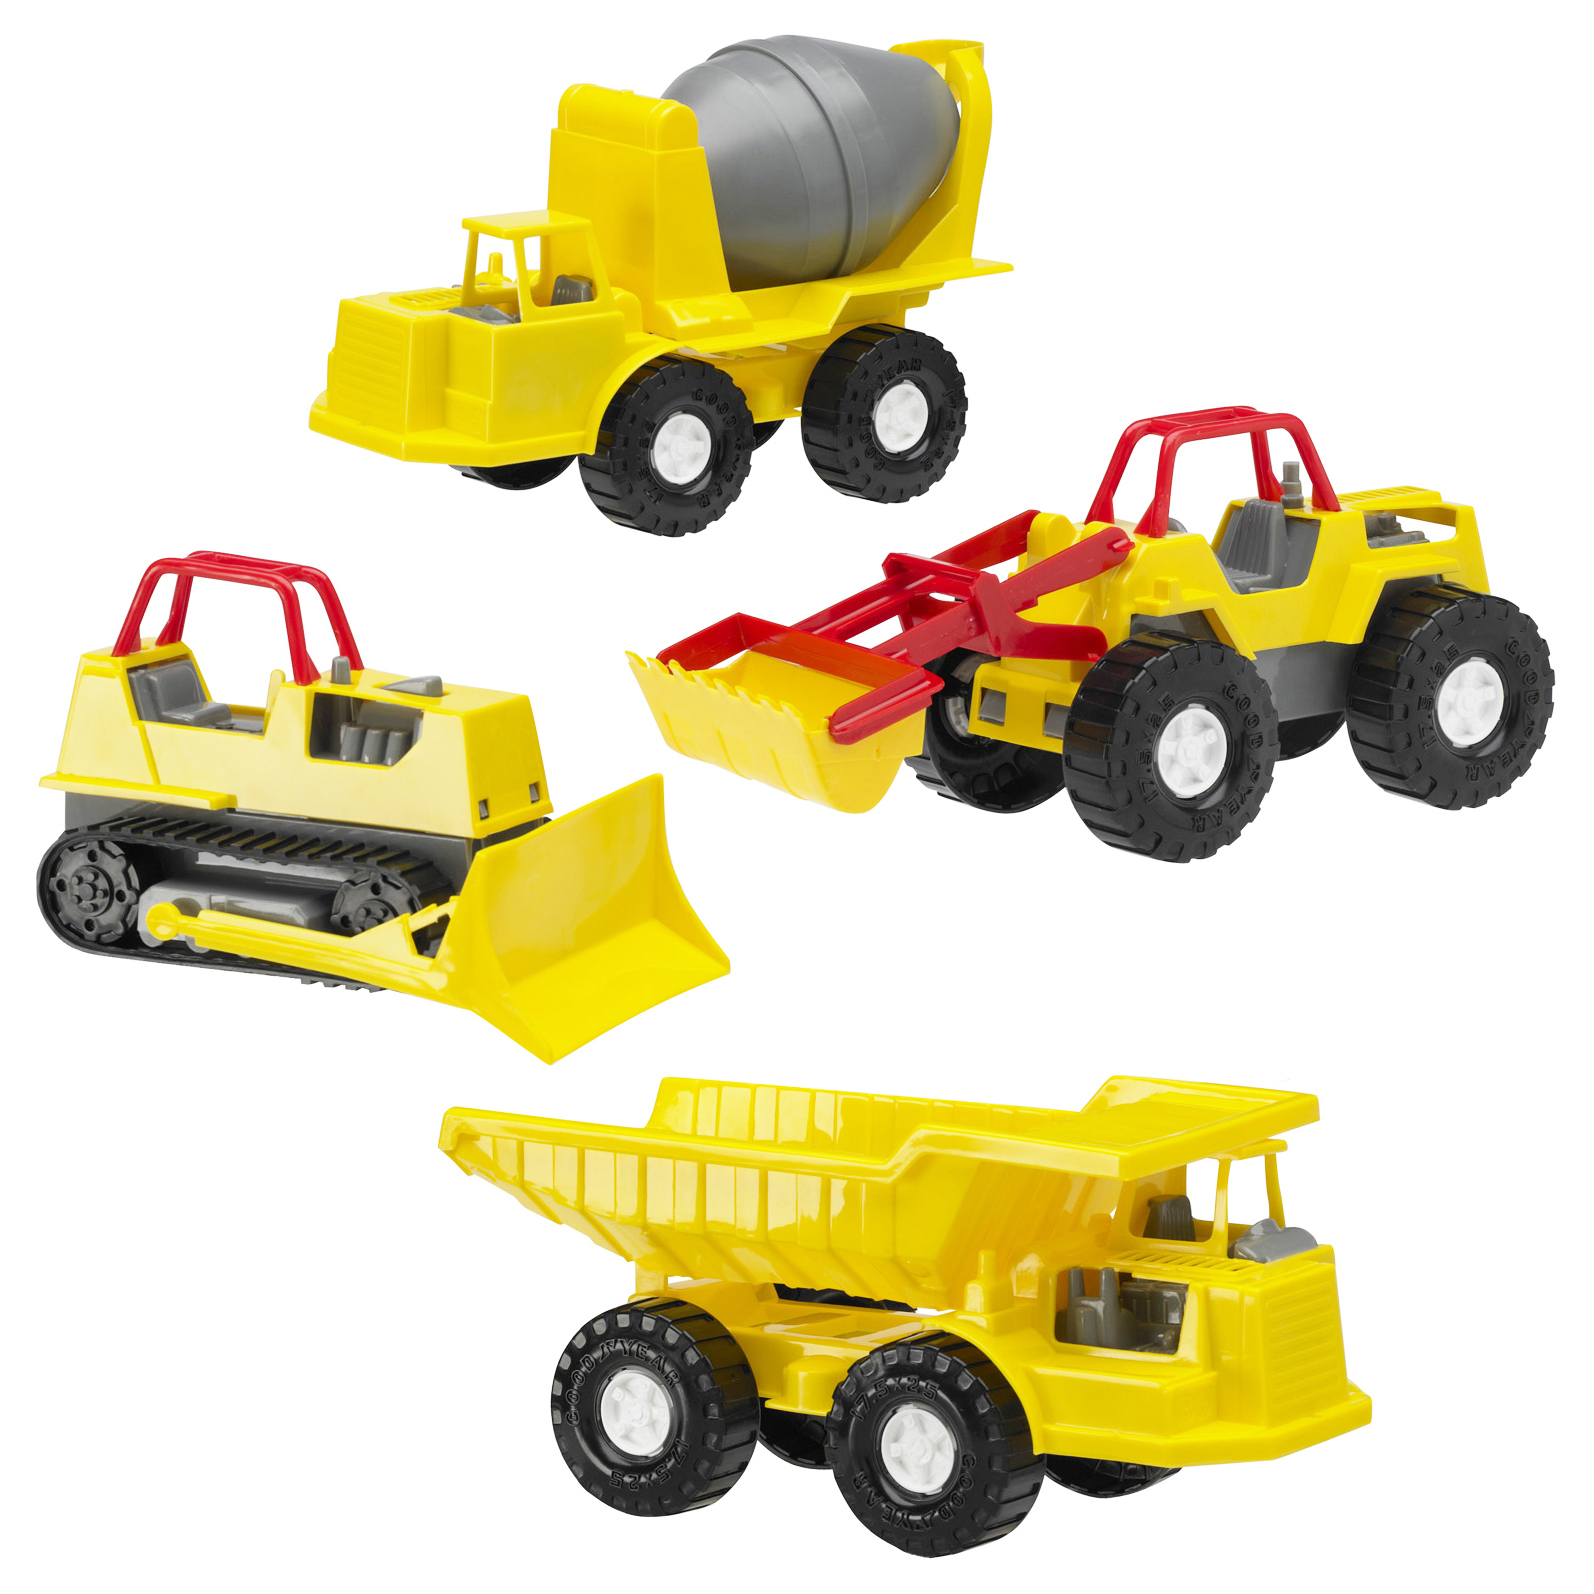 Assorted Construction Vehicles | American Plastic Toys